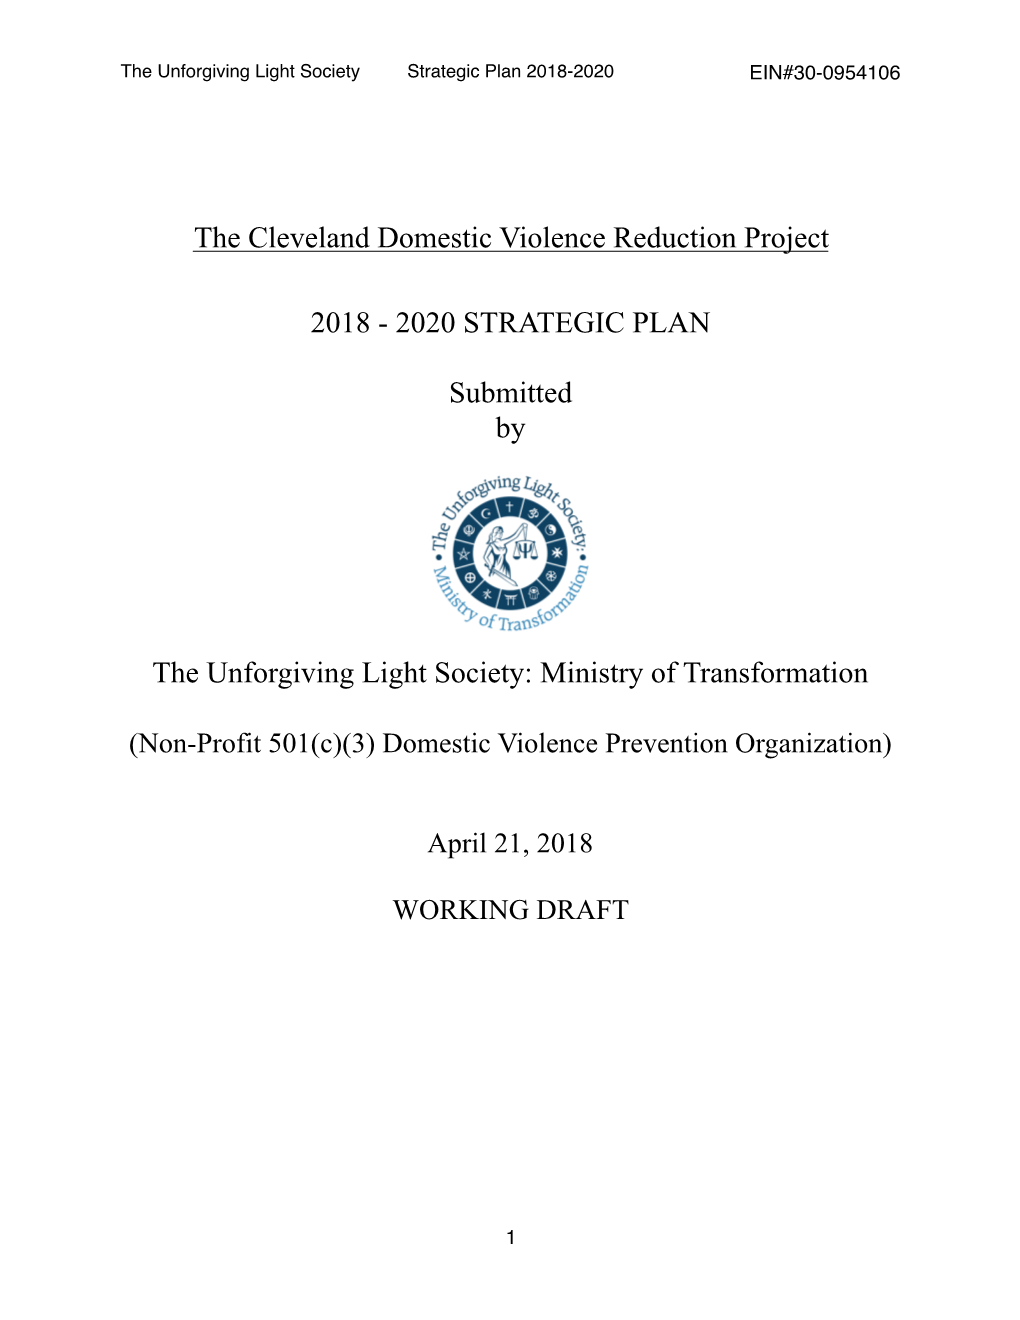 The Cleveland Domestic Violence Reduction Project 2018